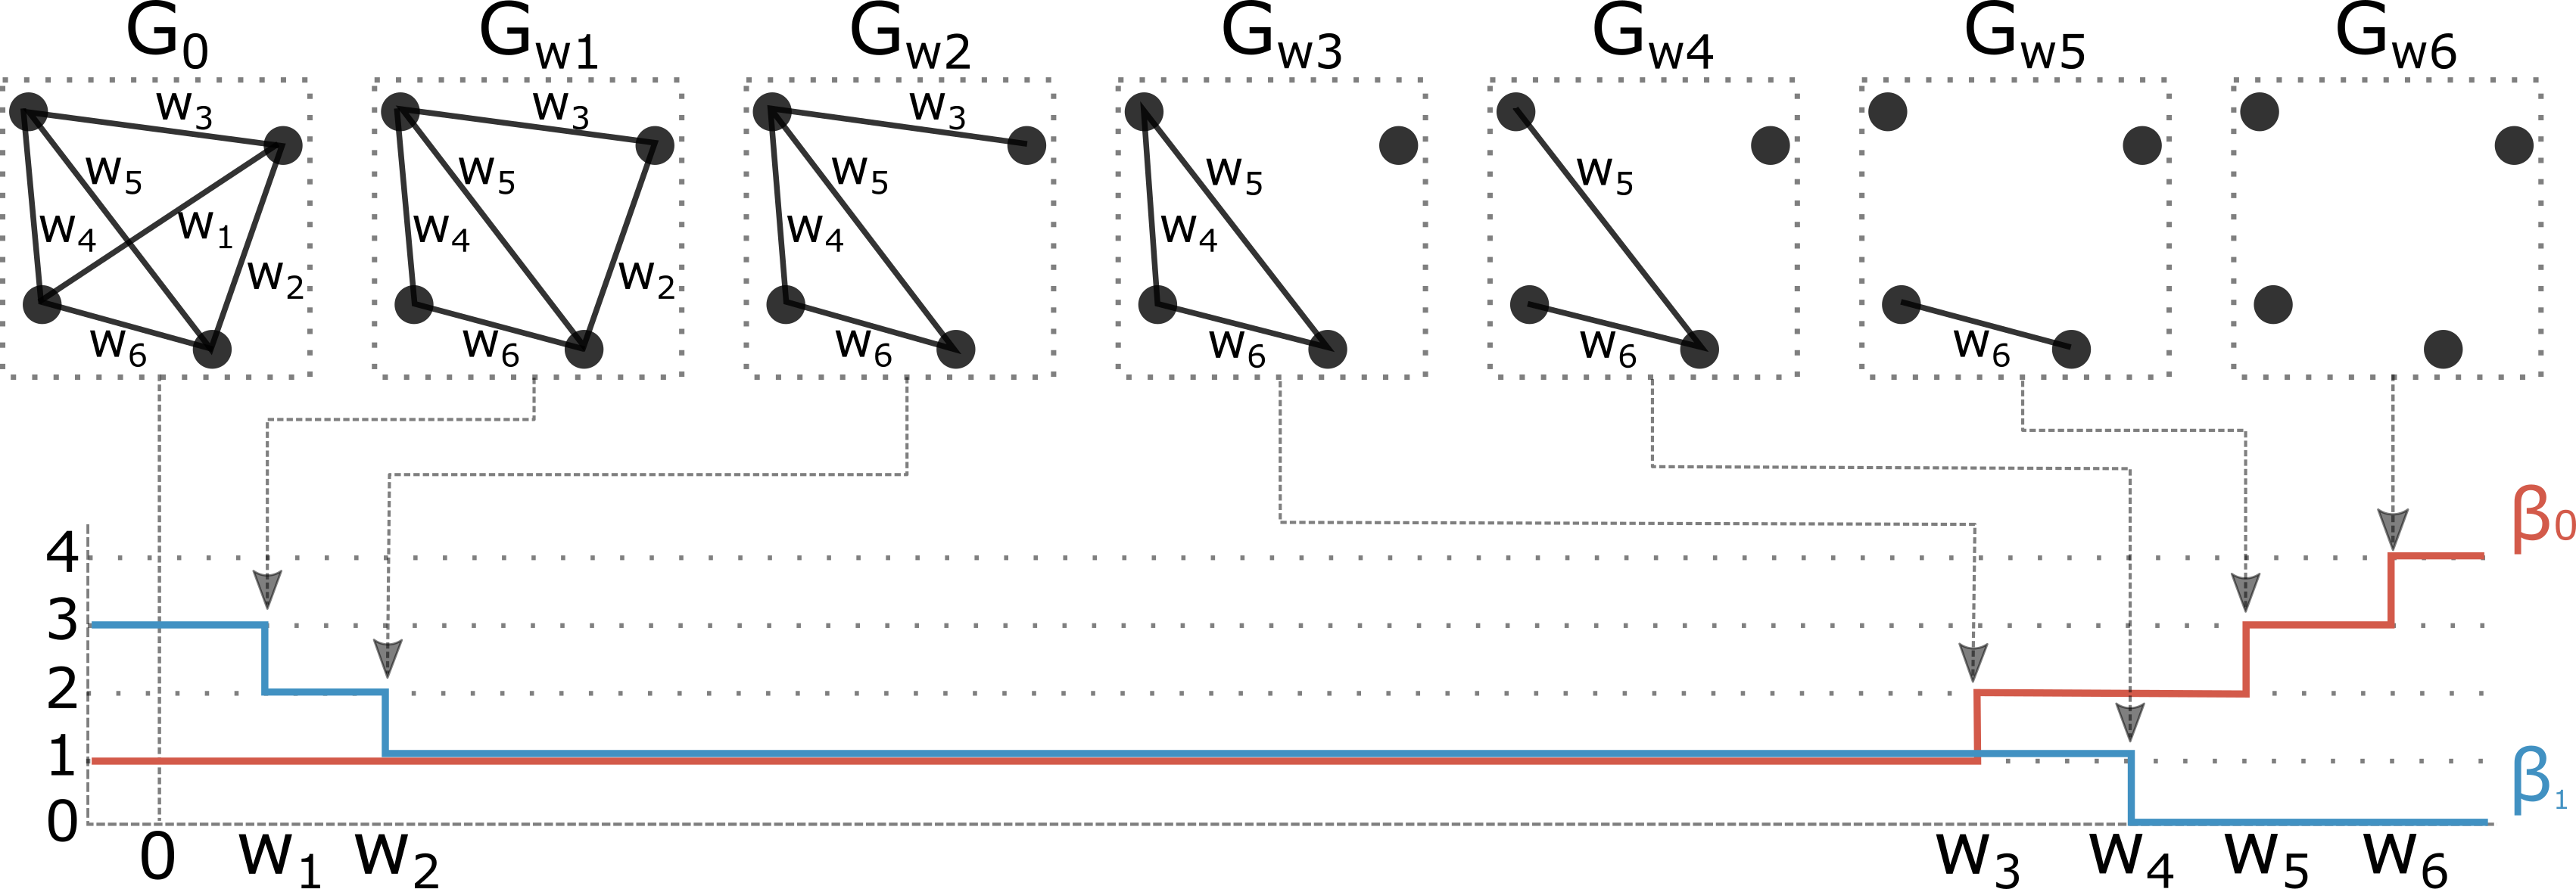 Schematic of graph filtration